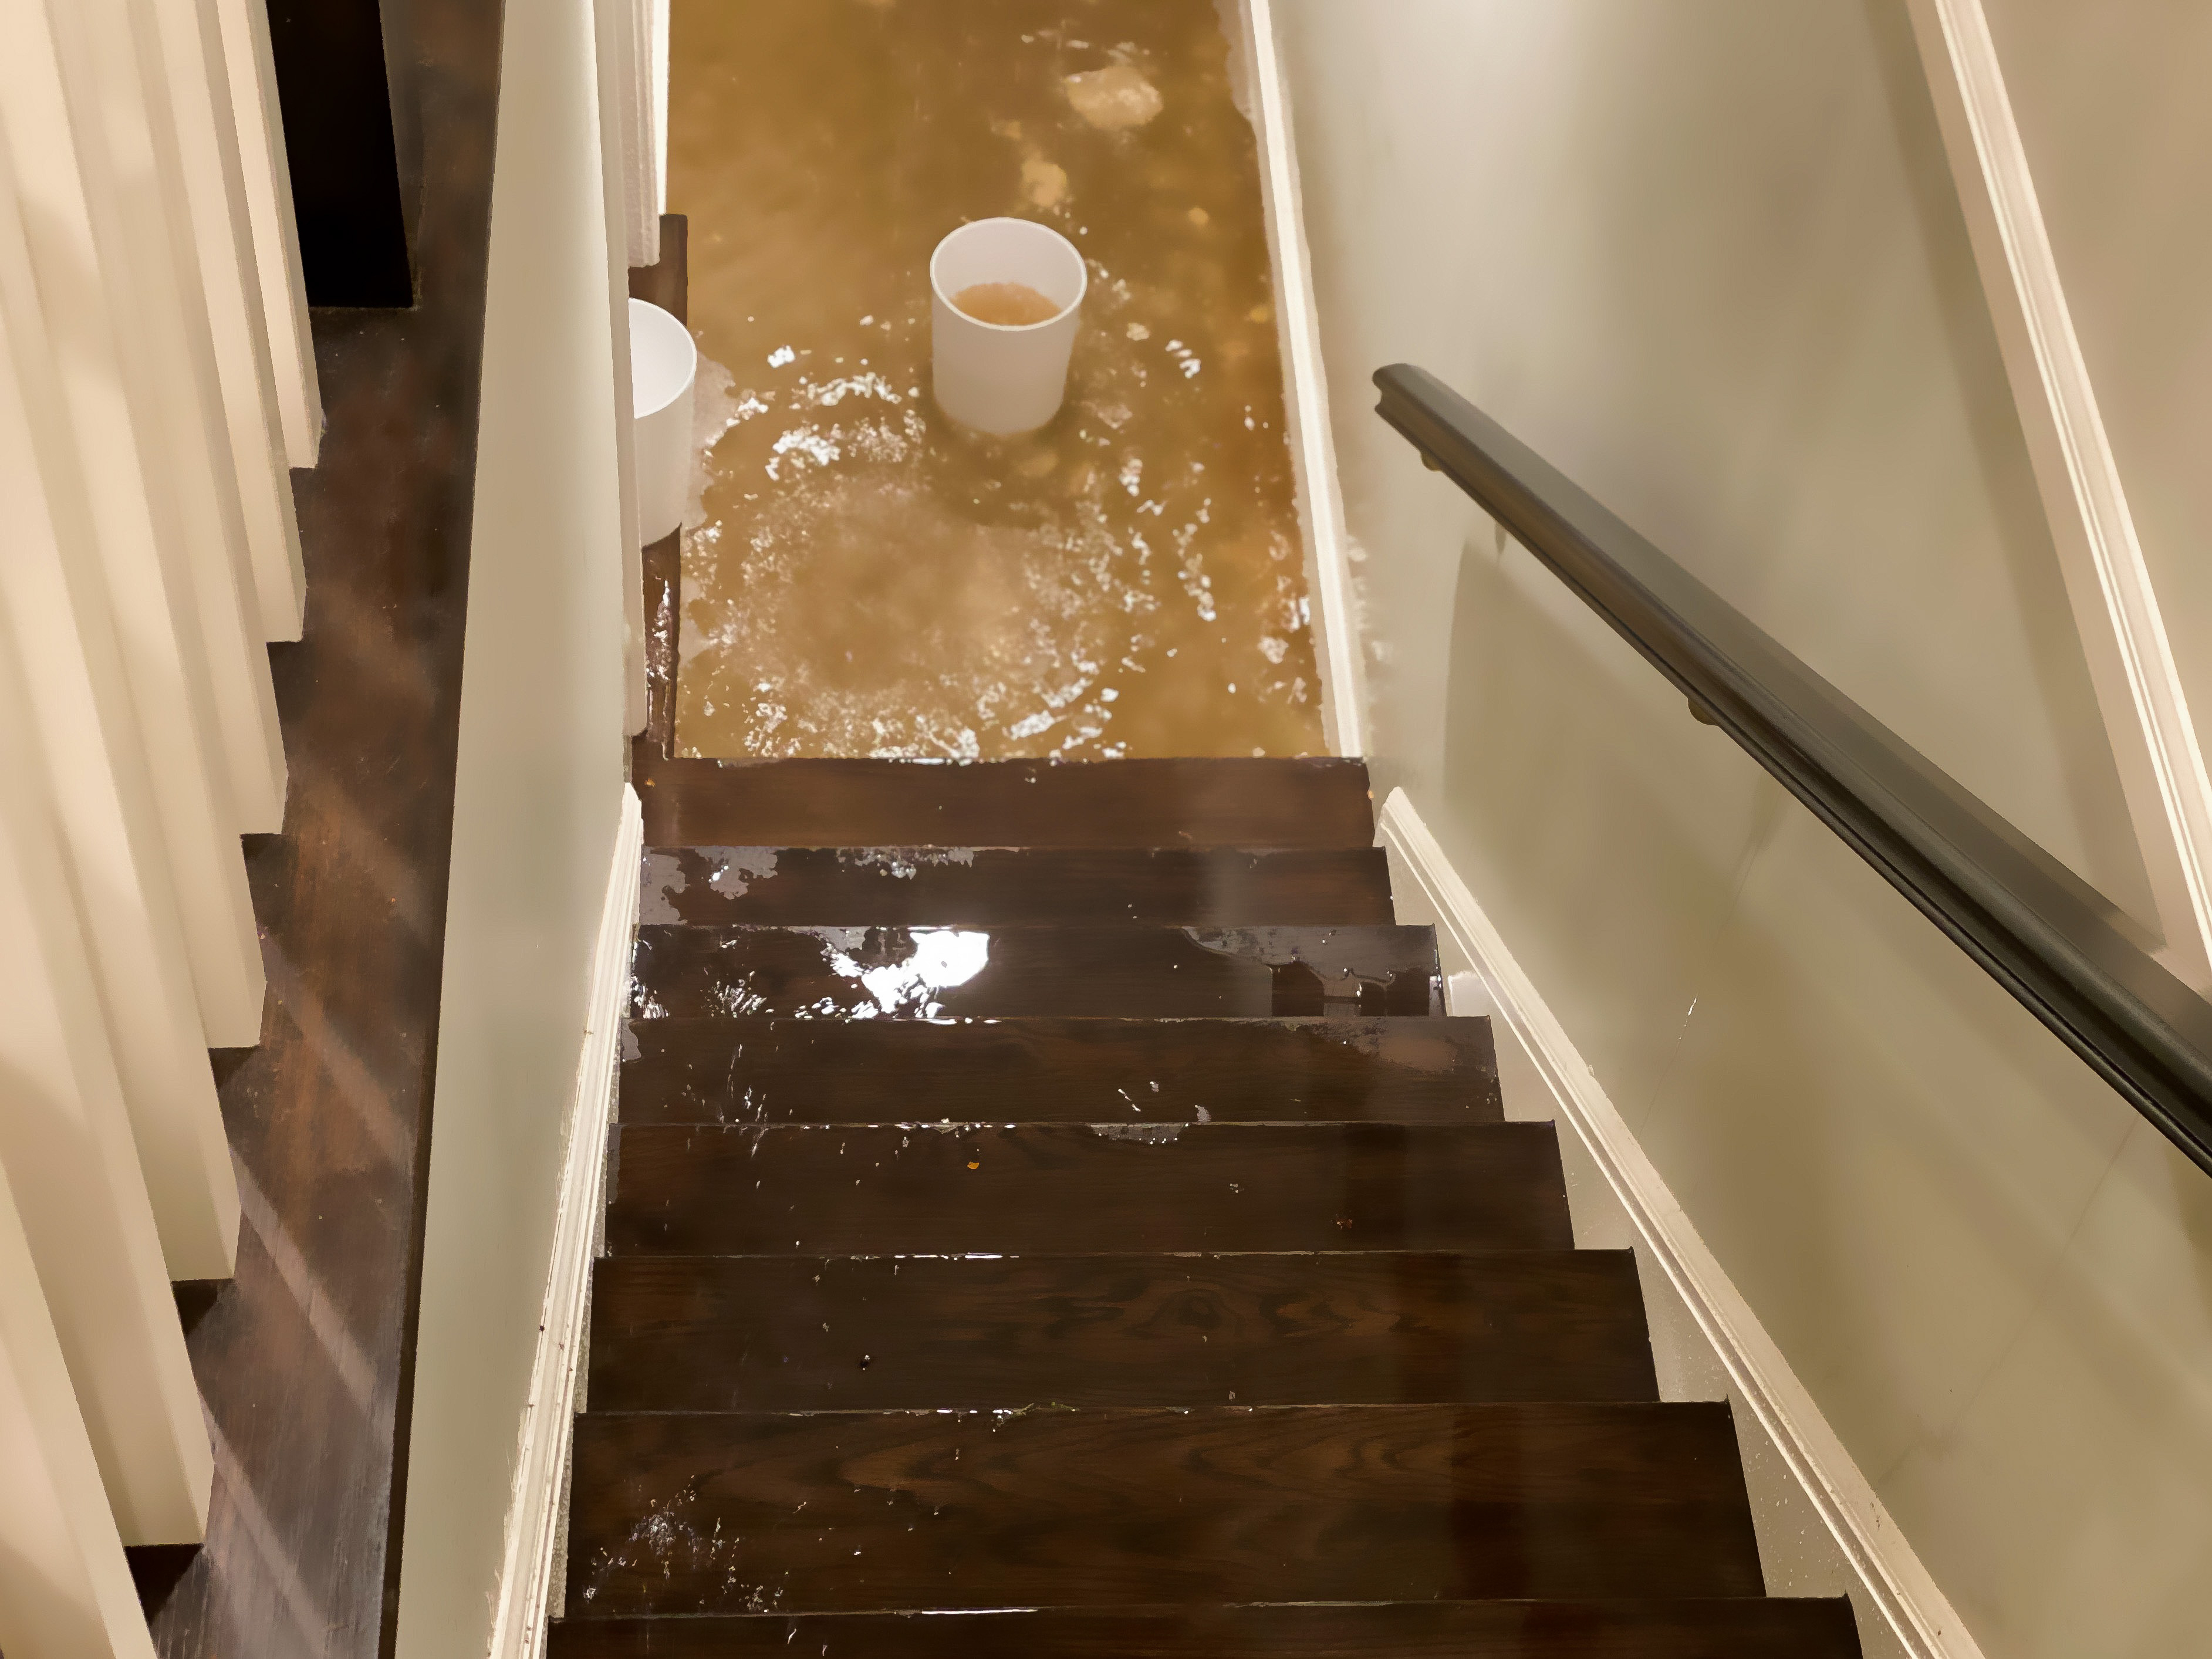 Water flooding a staircase with a bucket on a step